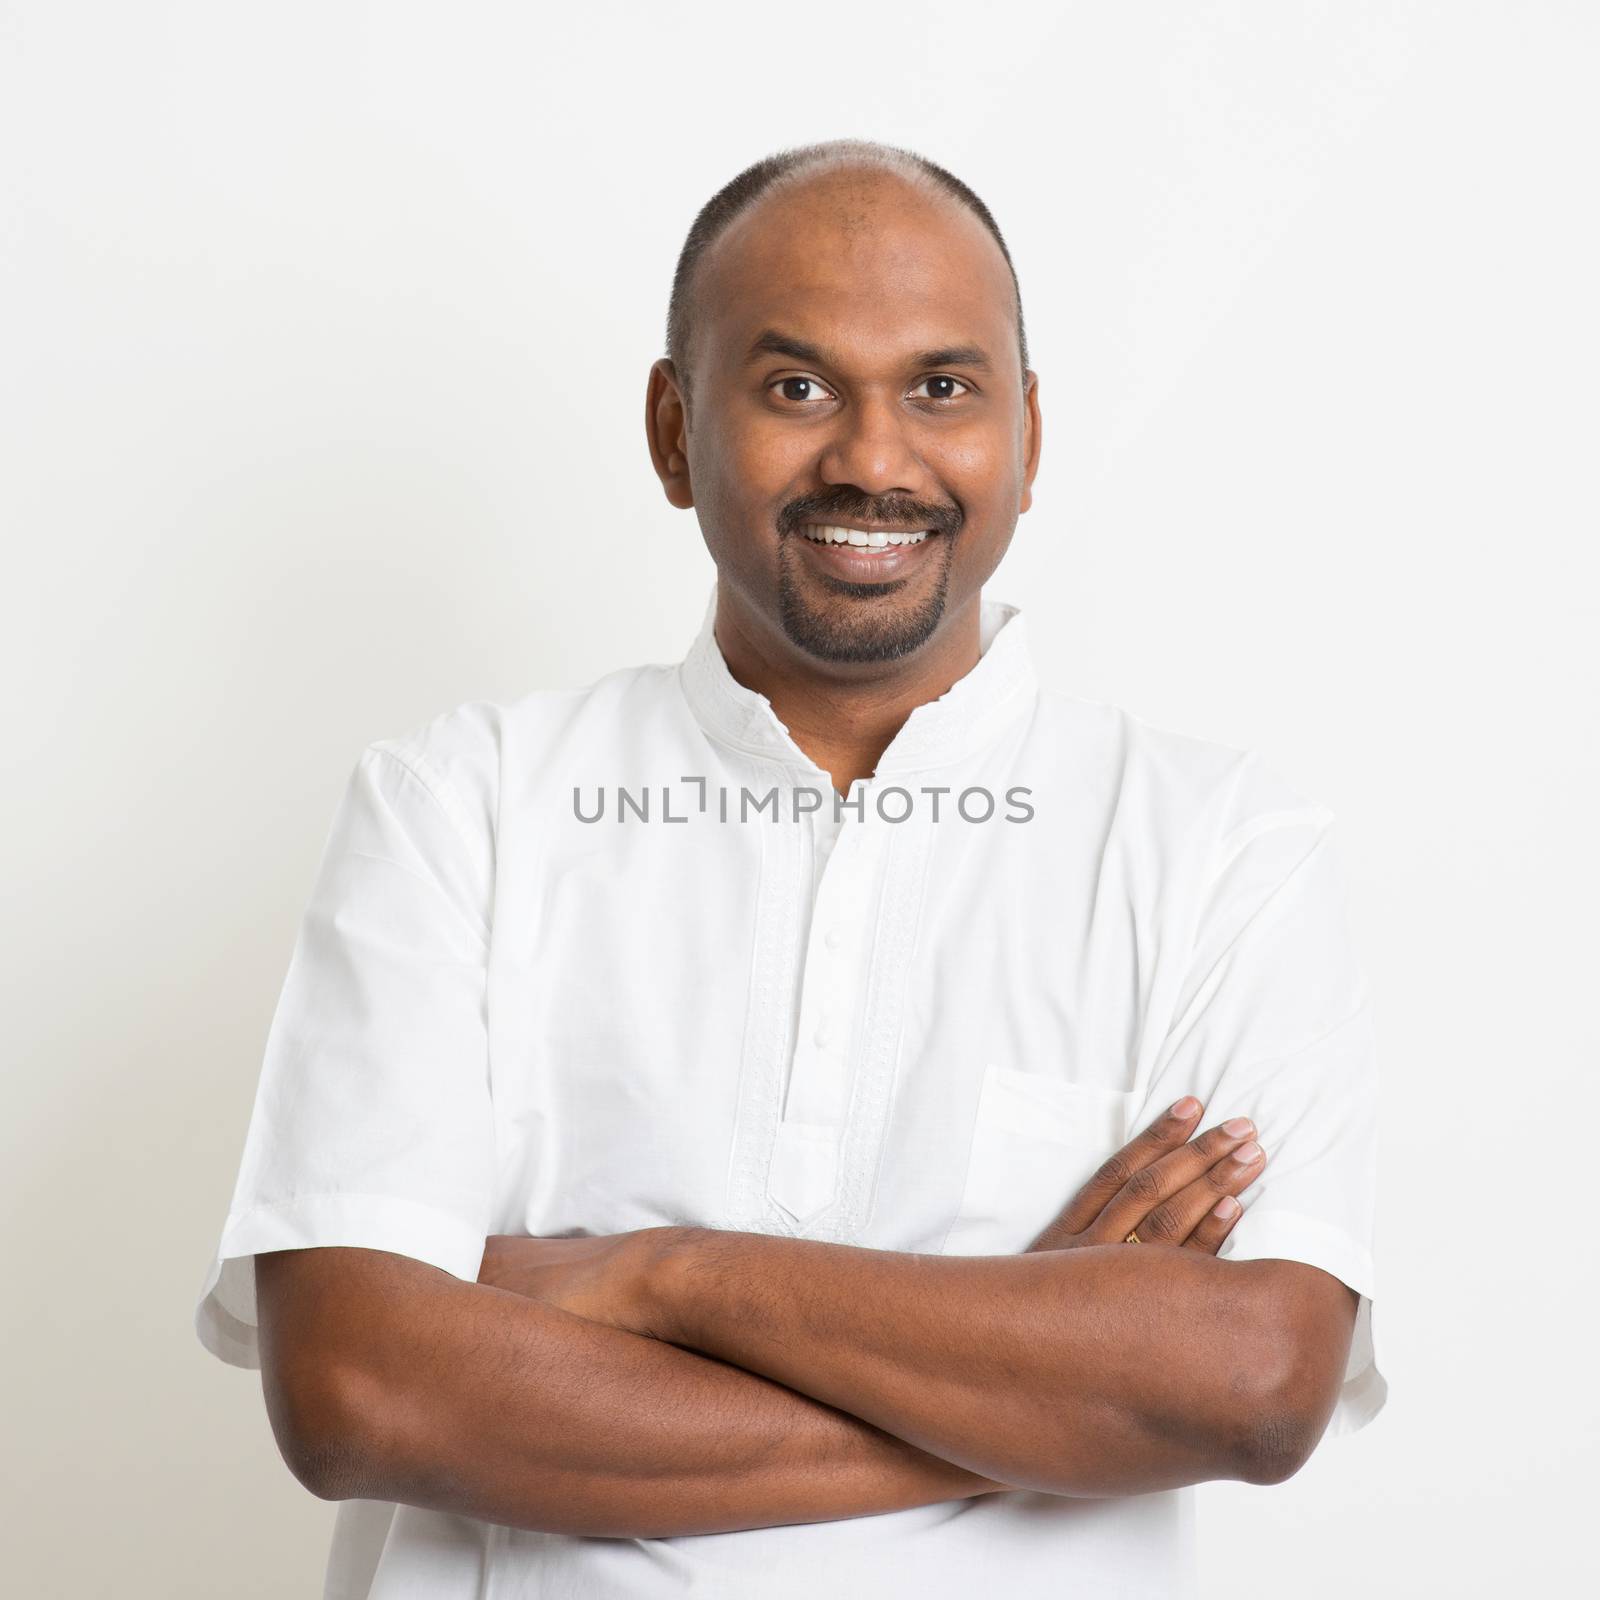 Portrait of mature casual business Indian man arms crossed and smiling, standing on plain background with shadow.